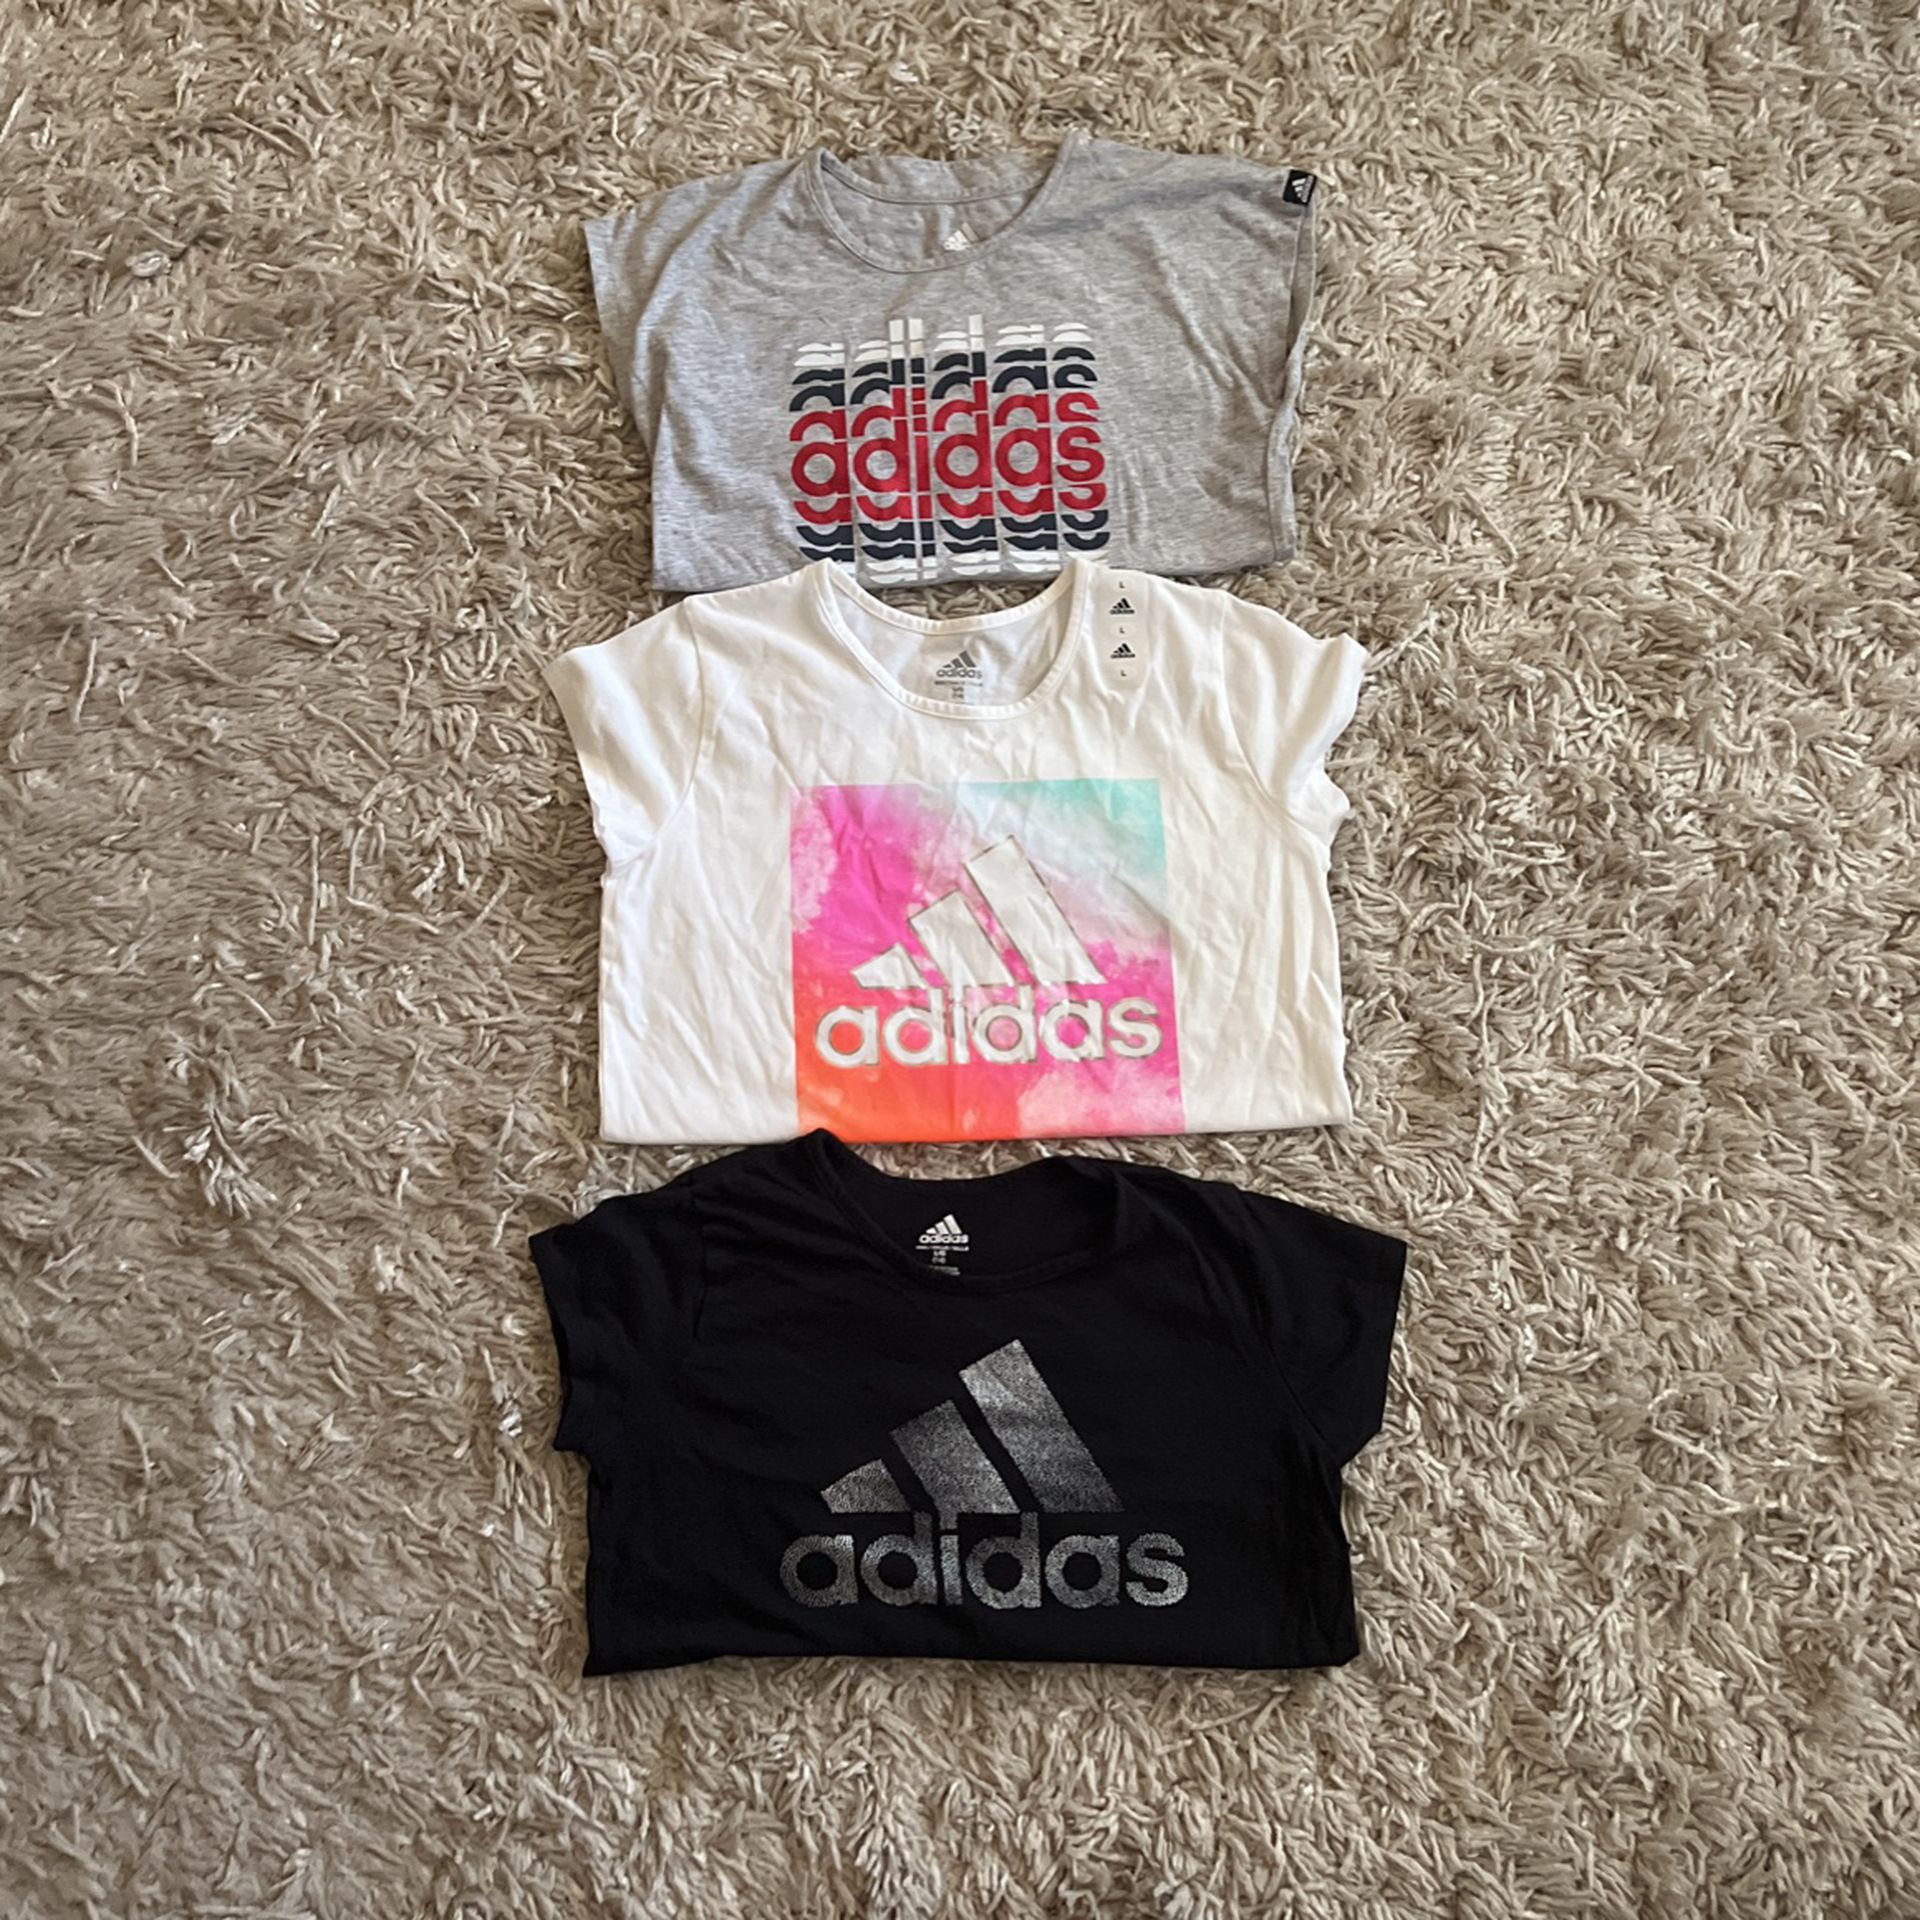 3 Adidas un used Shirts youth size L fits like women’s size S